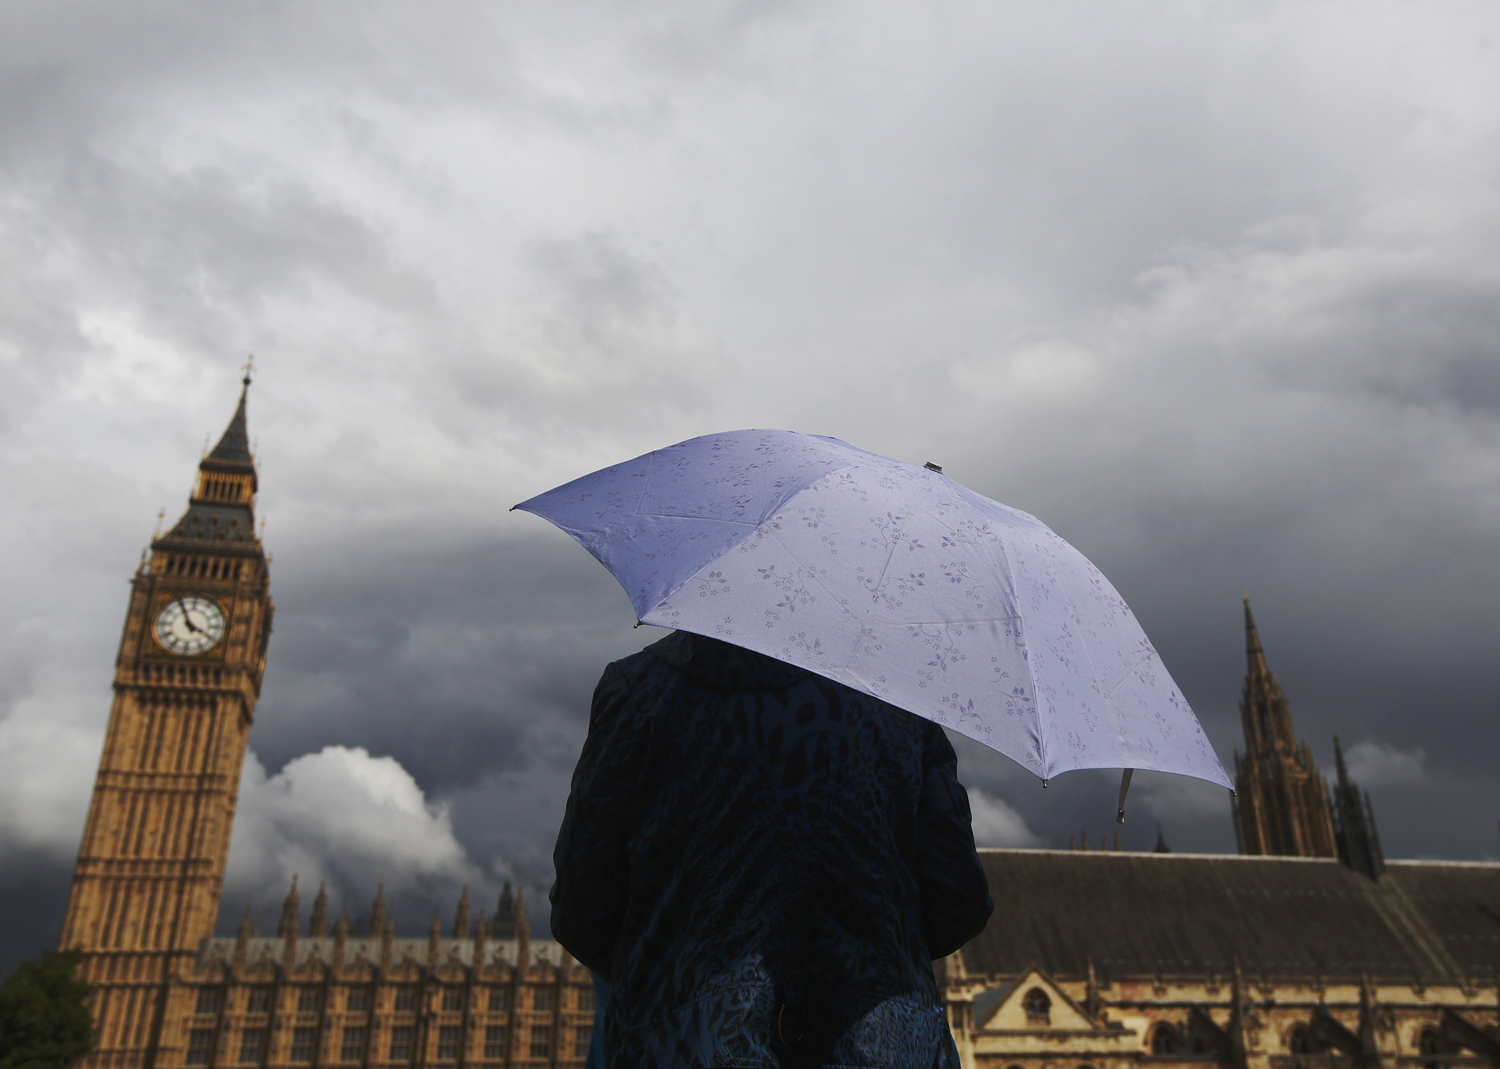 Aug. 11, 2014. A woman looks towards dark clouds over the Houses of Parliament in central London.